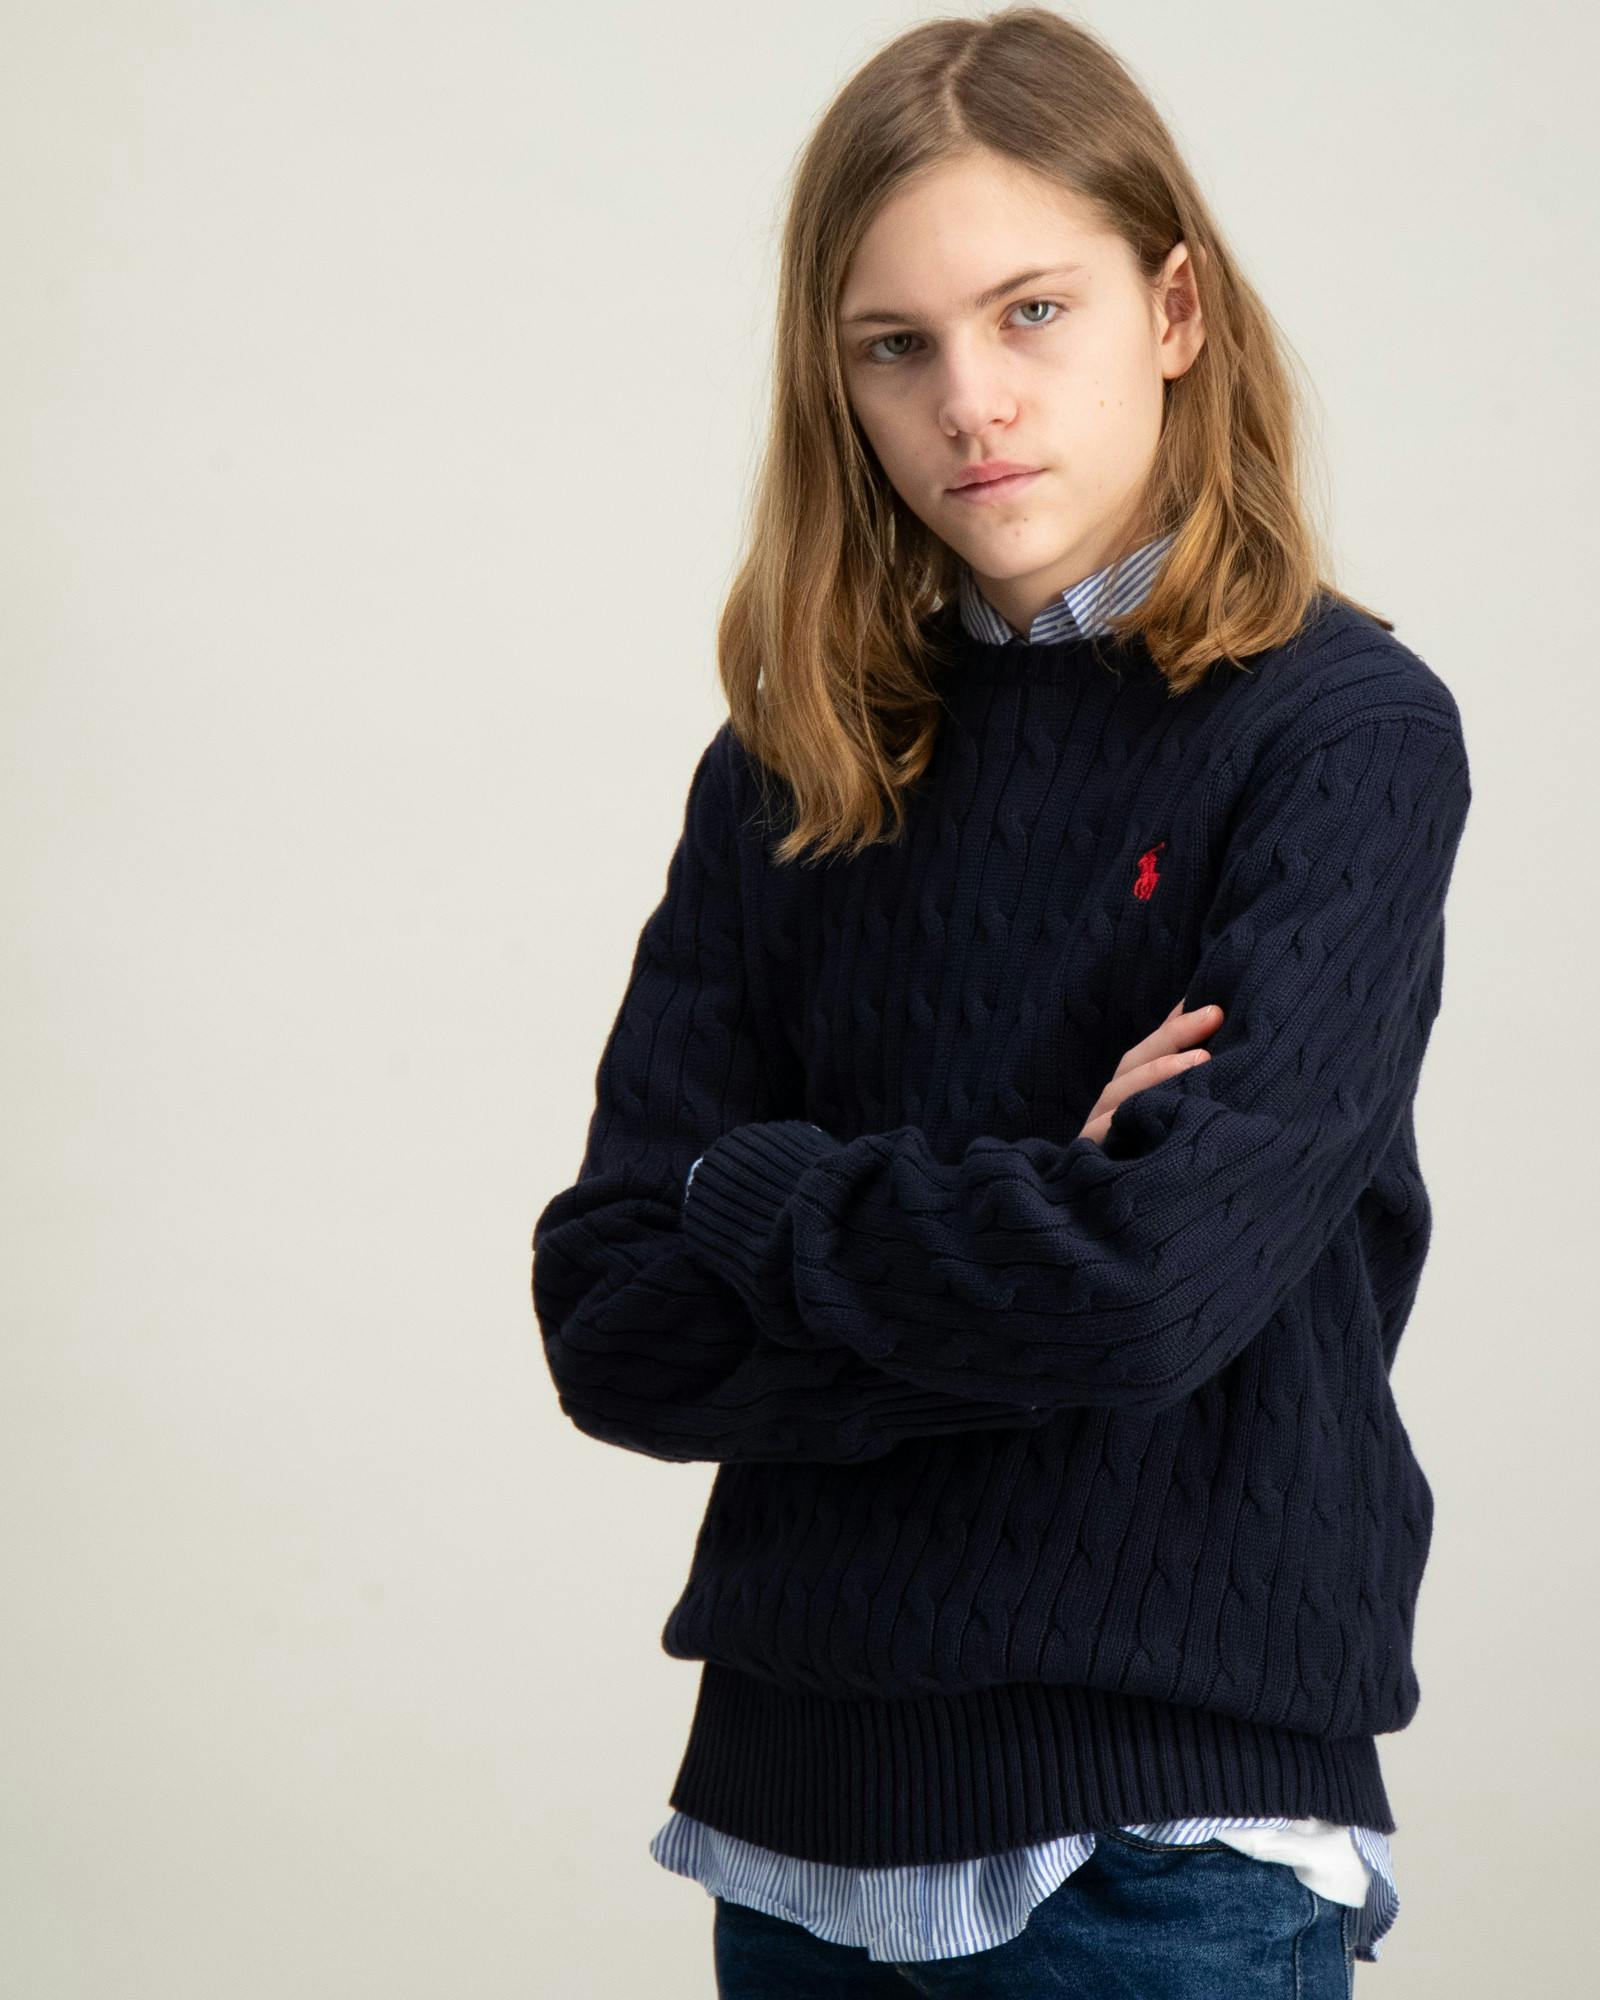 Cable-Knit Cotton Sweater